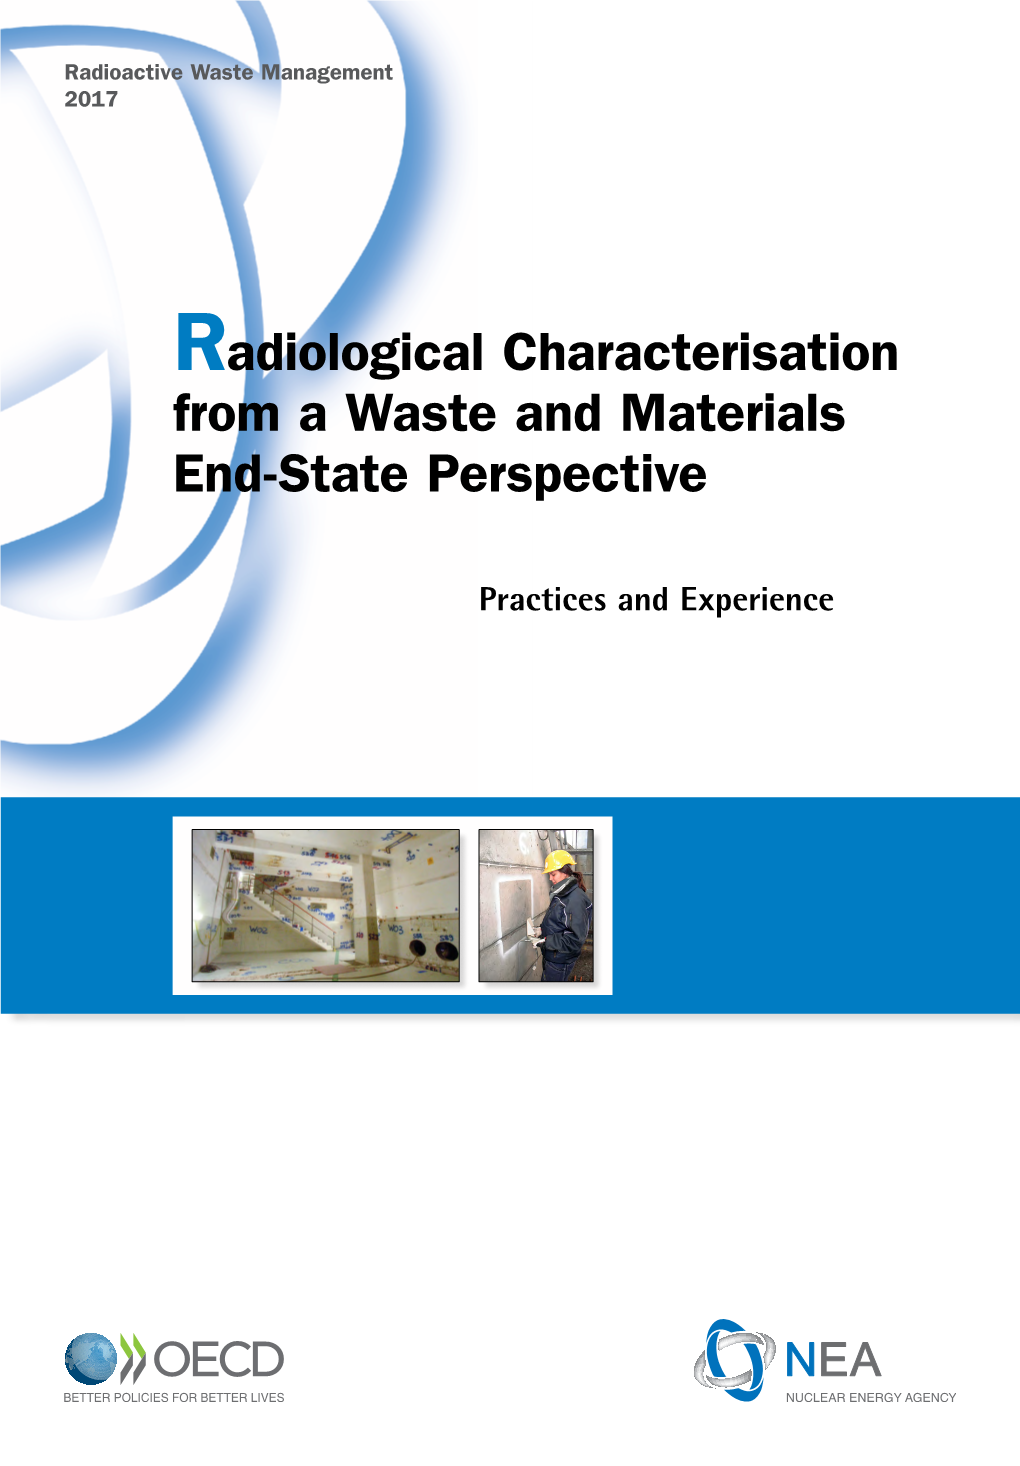 Radiological Characterisation from a Waste and Materials End-State Perspective from a Waste and Materials End-State Perspective